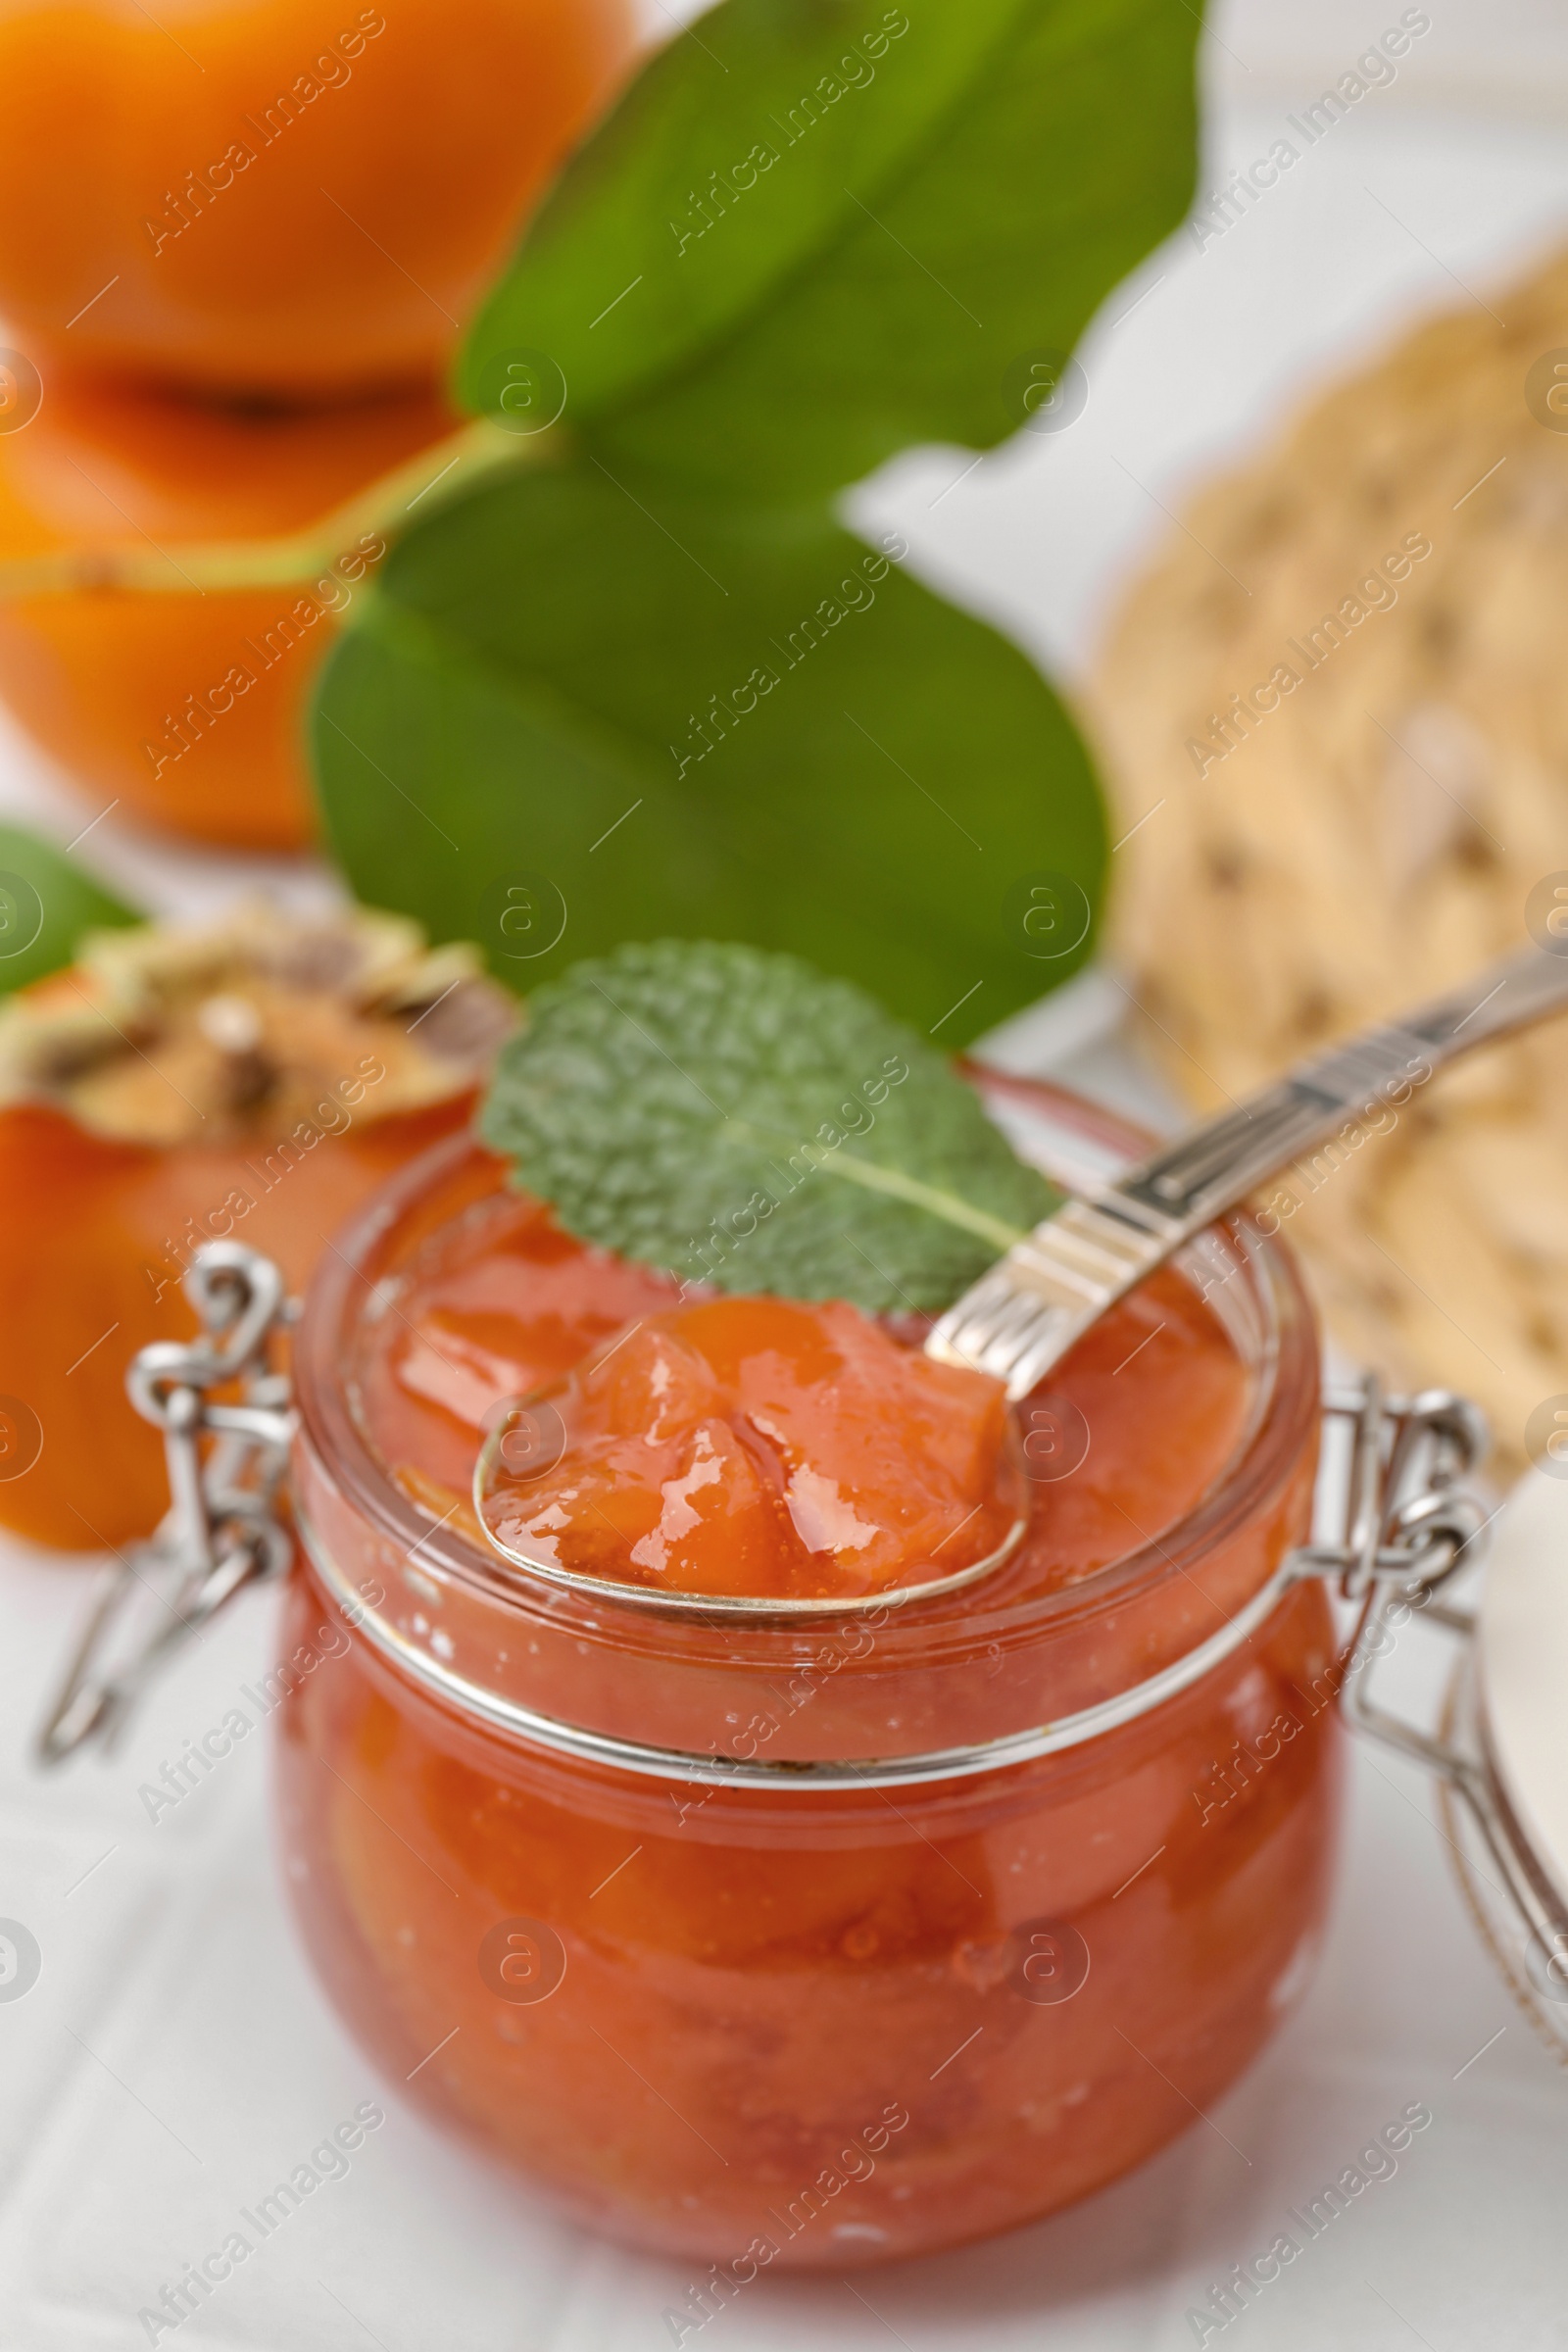 Photo of Jar and spoon of tasty persimmon jam on white tiled table, above view